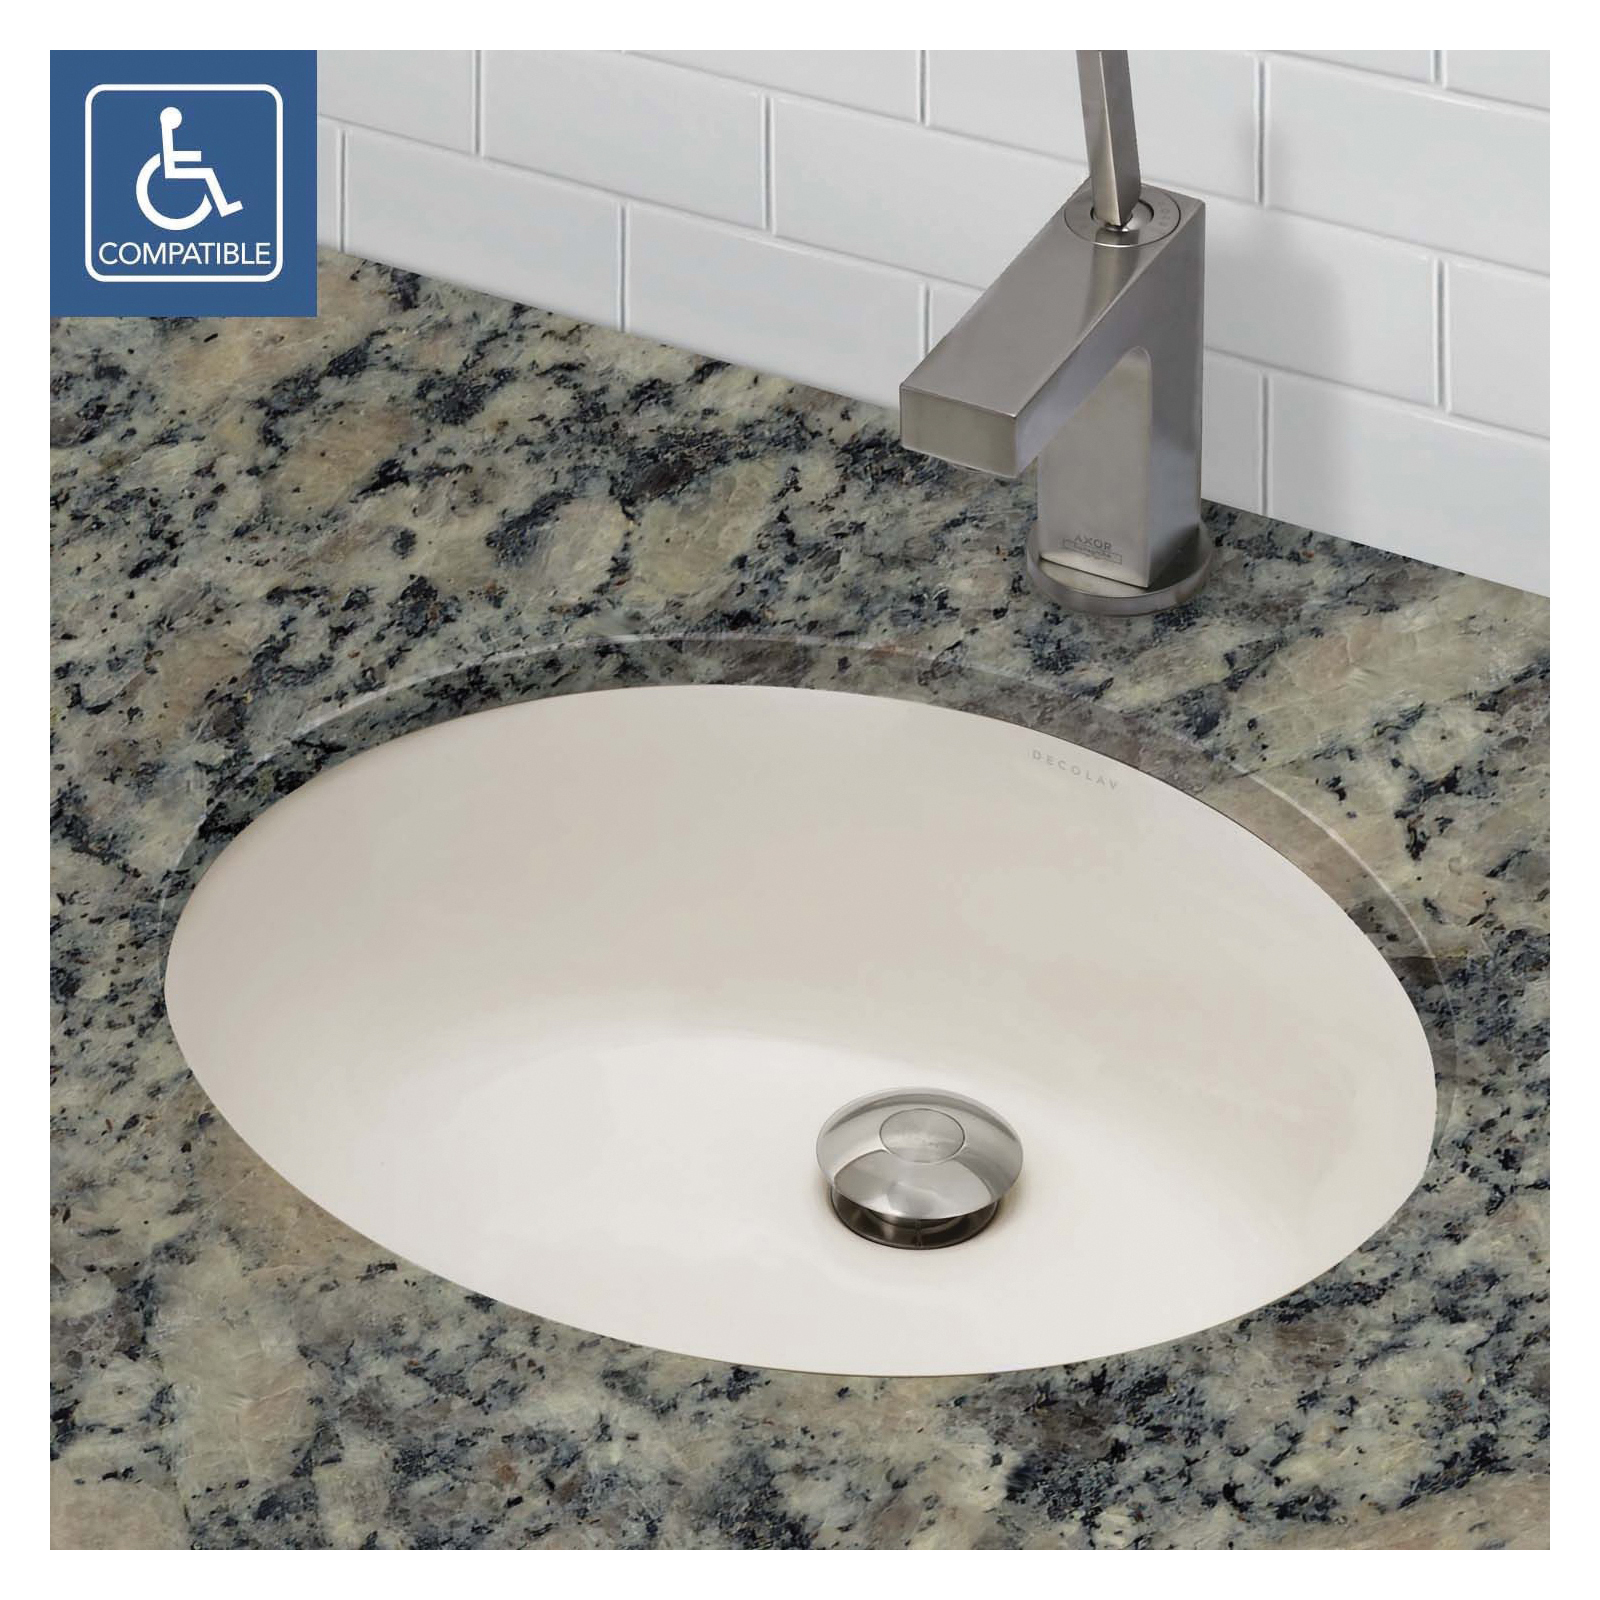 DECOLAV® 1401-CBN Classically Redefined® Bathroom Sink With Overflow, Oval, 19.25 in W x 16.25 in D x 7.13 in H, Under Mount, Vitreous China, Ceramic Biscuit, Import